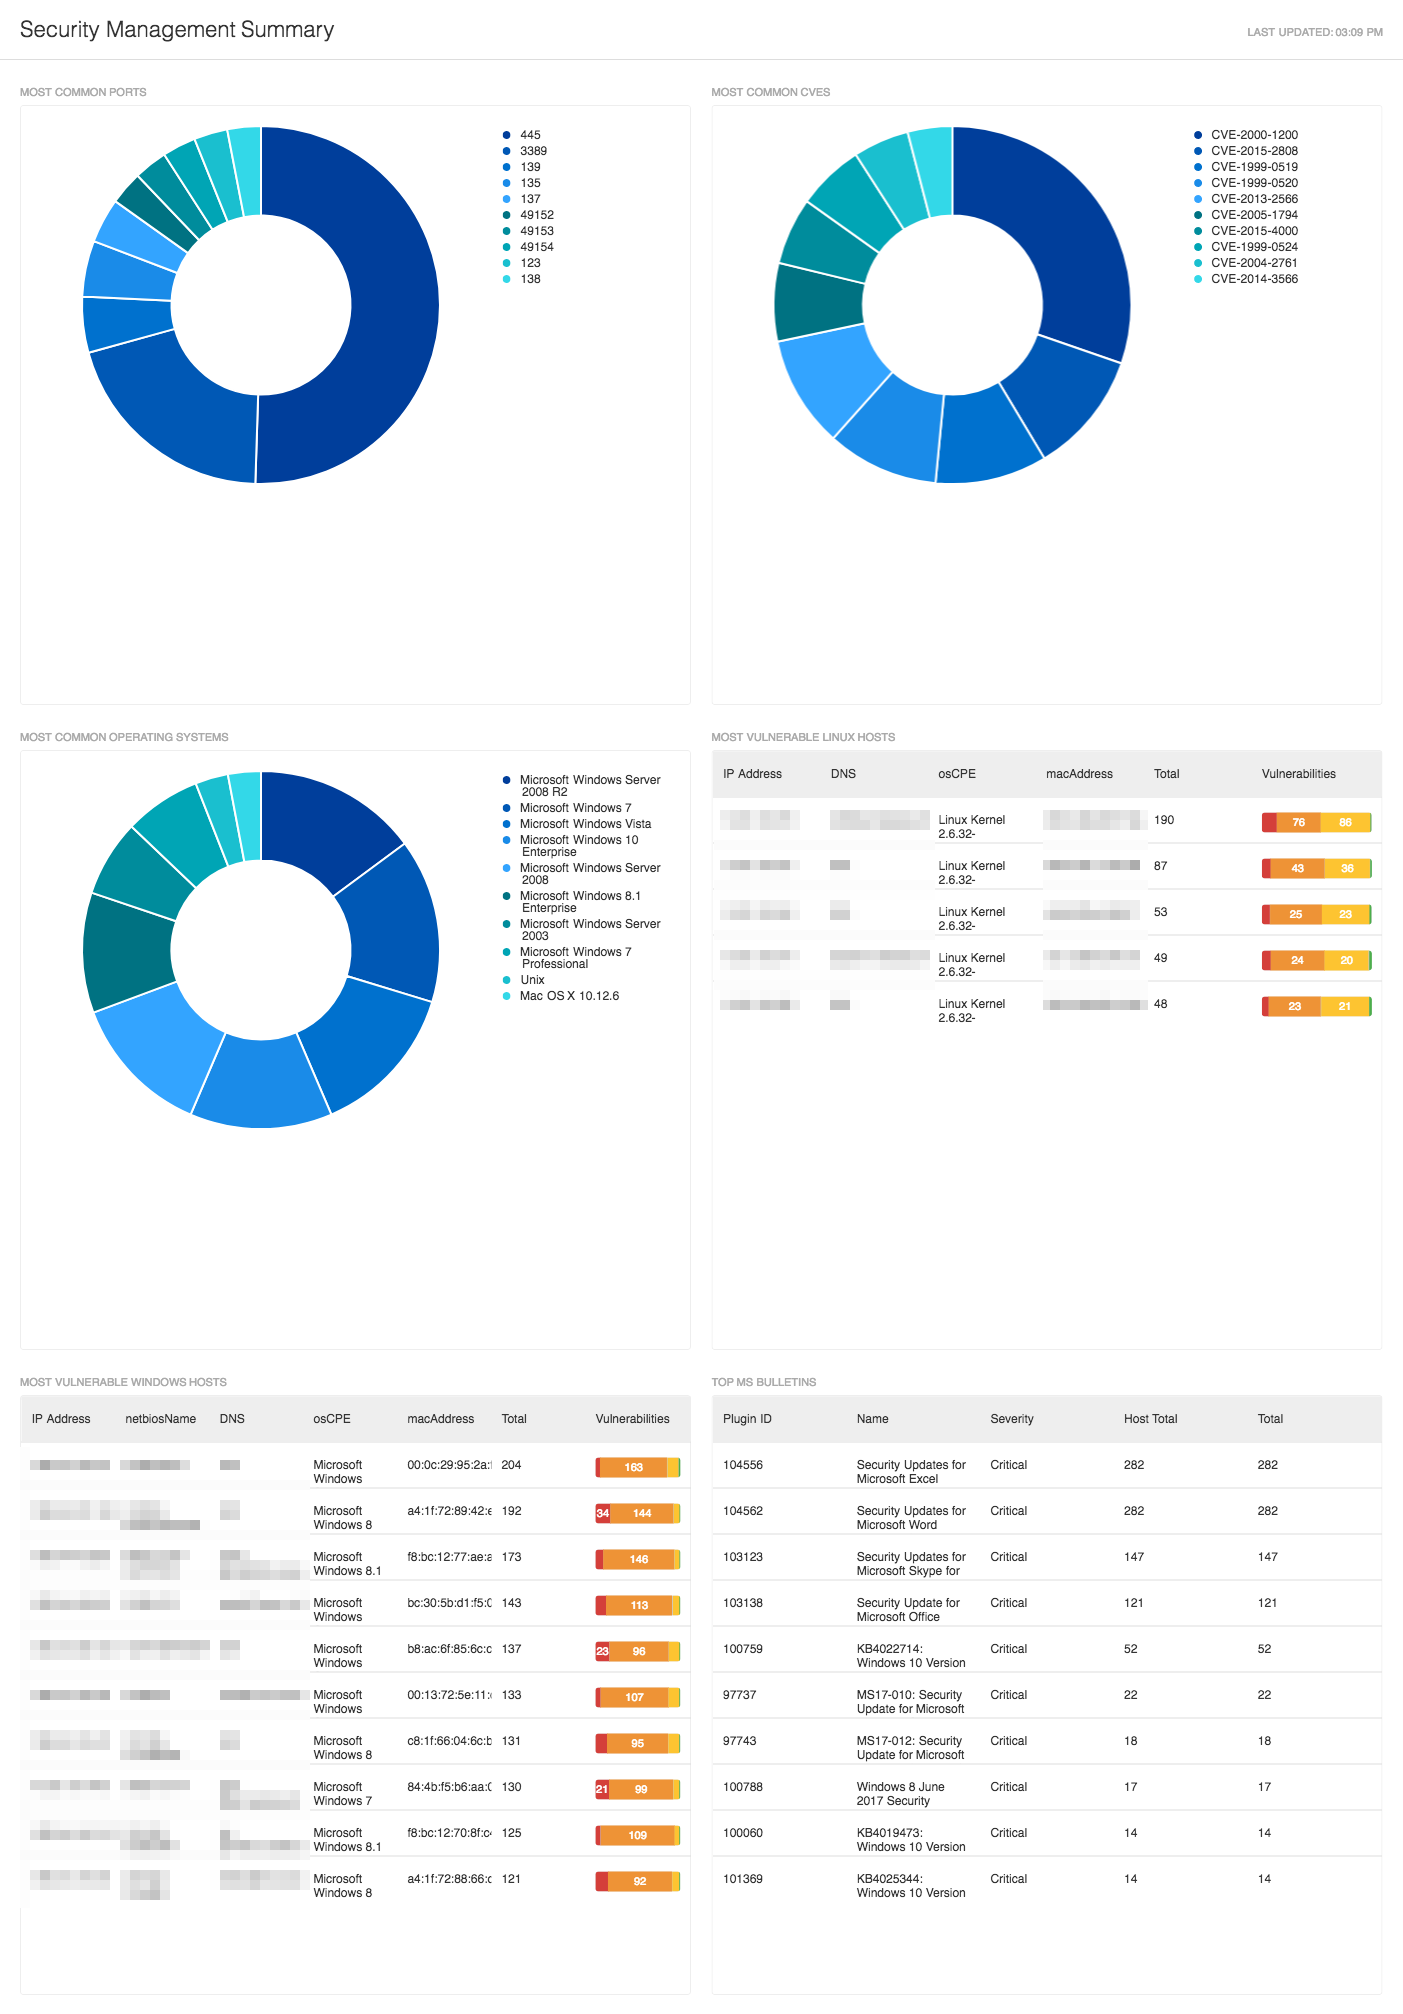 Security Management Summary Dashboard